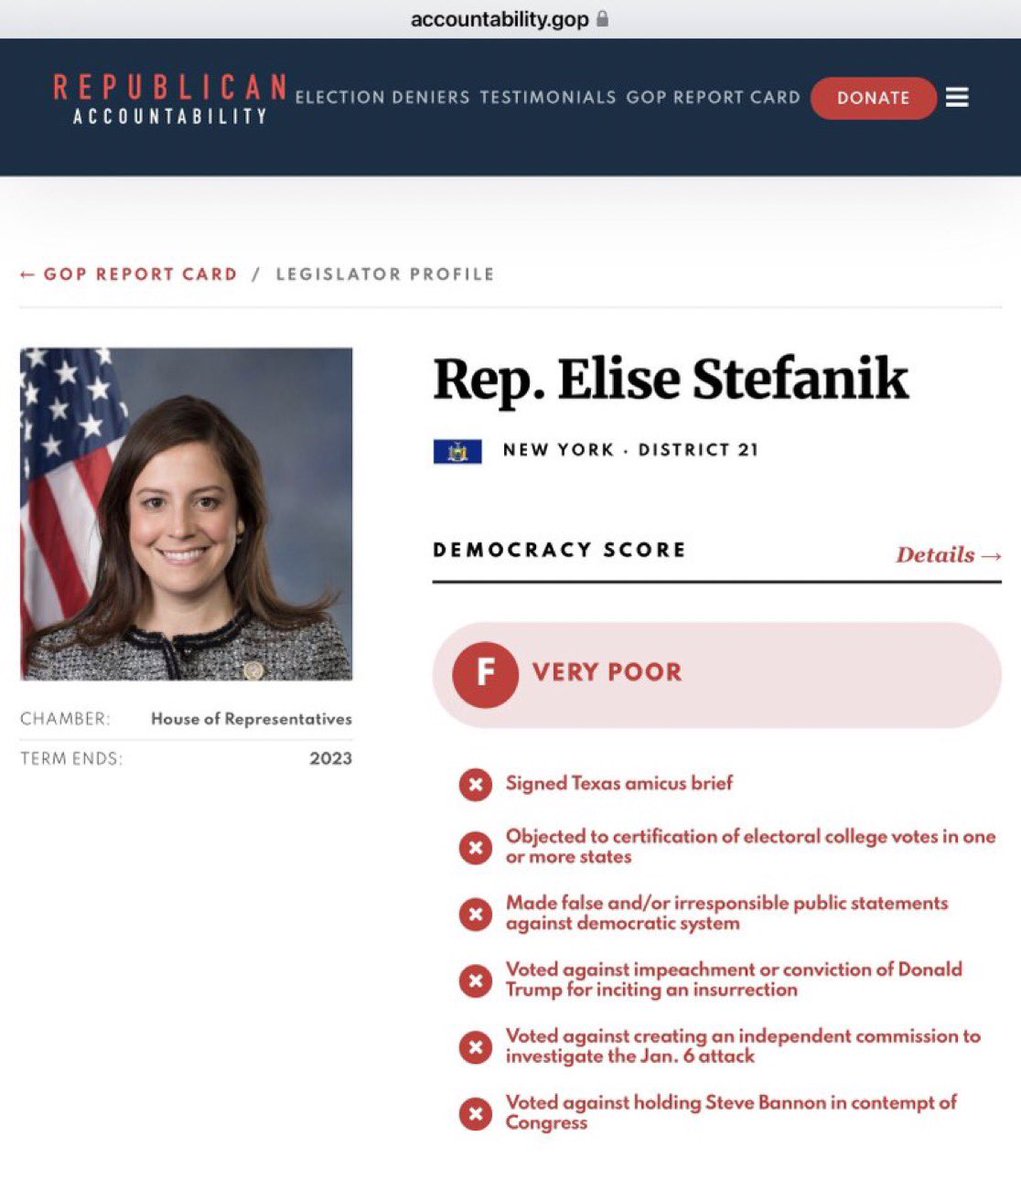 @BidenHQ Elise Stefanik is lying through her teeth. And she’s a traitor who puts trump first, not the United States.